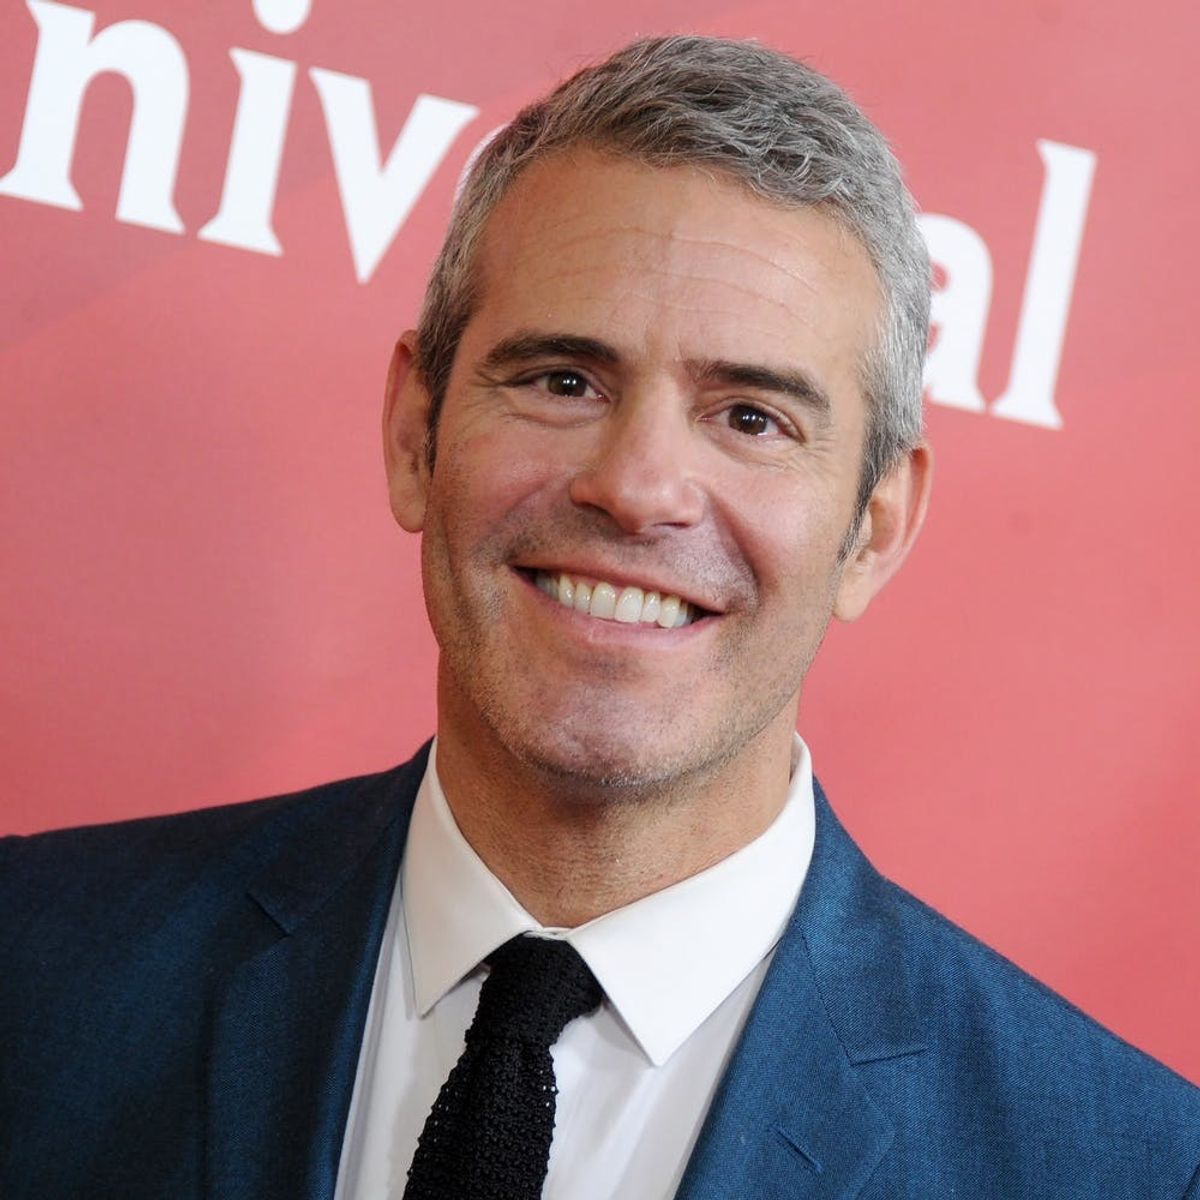 Andy Cohen Is Bringing Back This Wildly Popular Dating Show